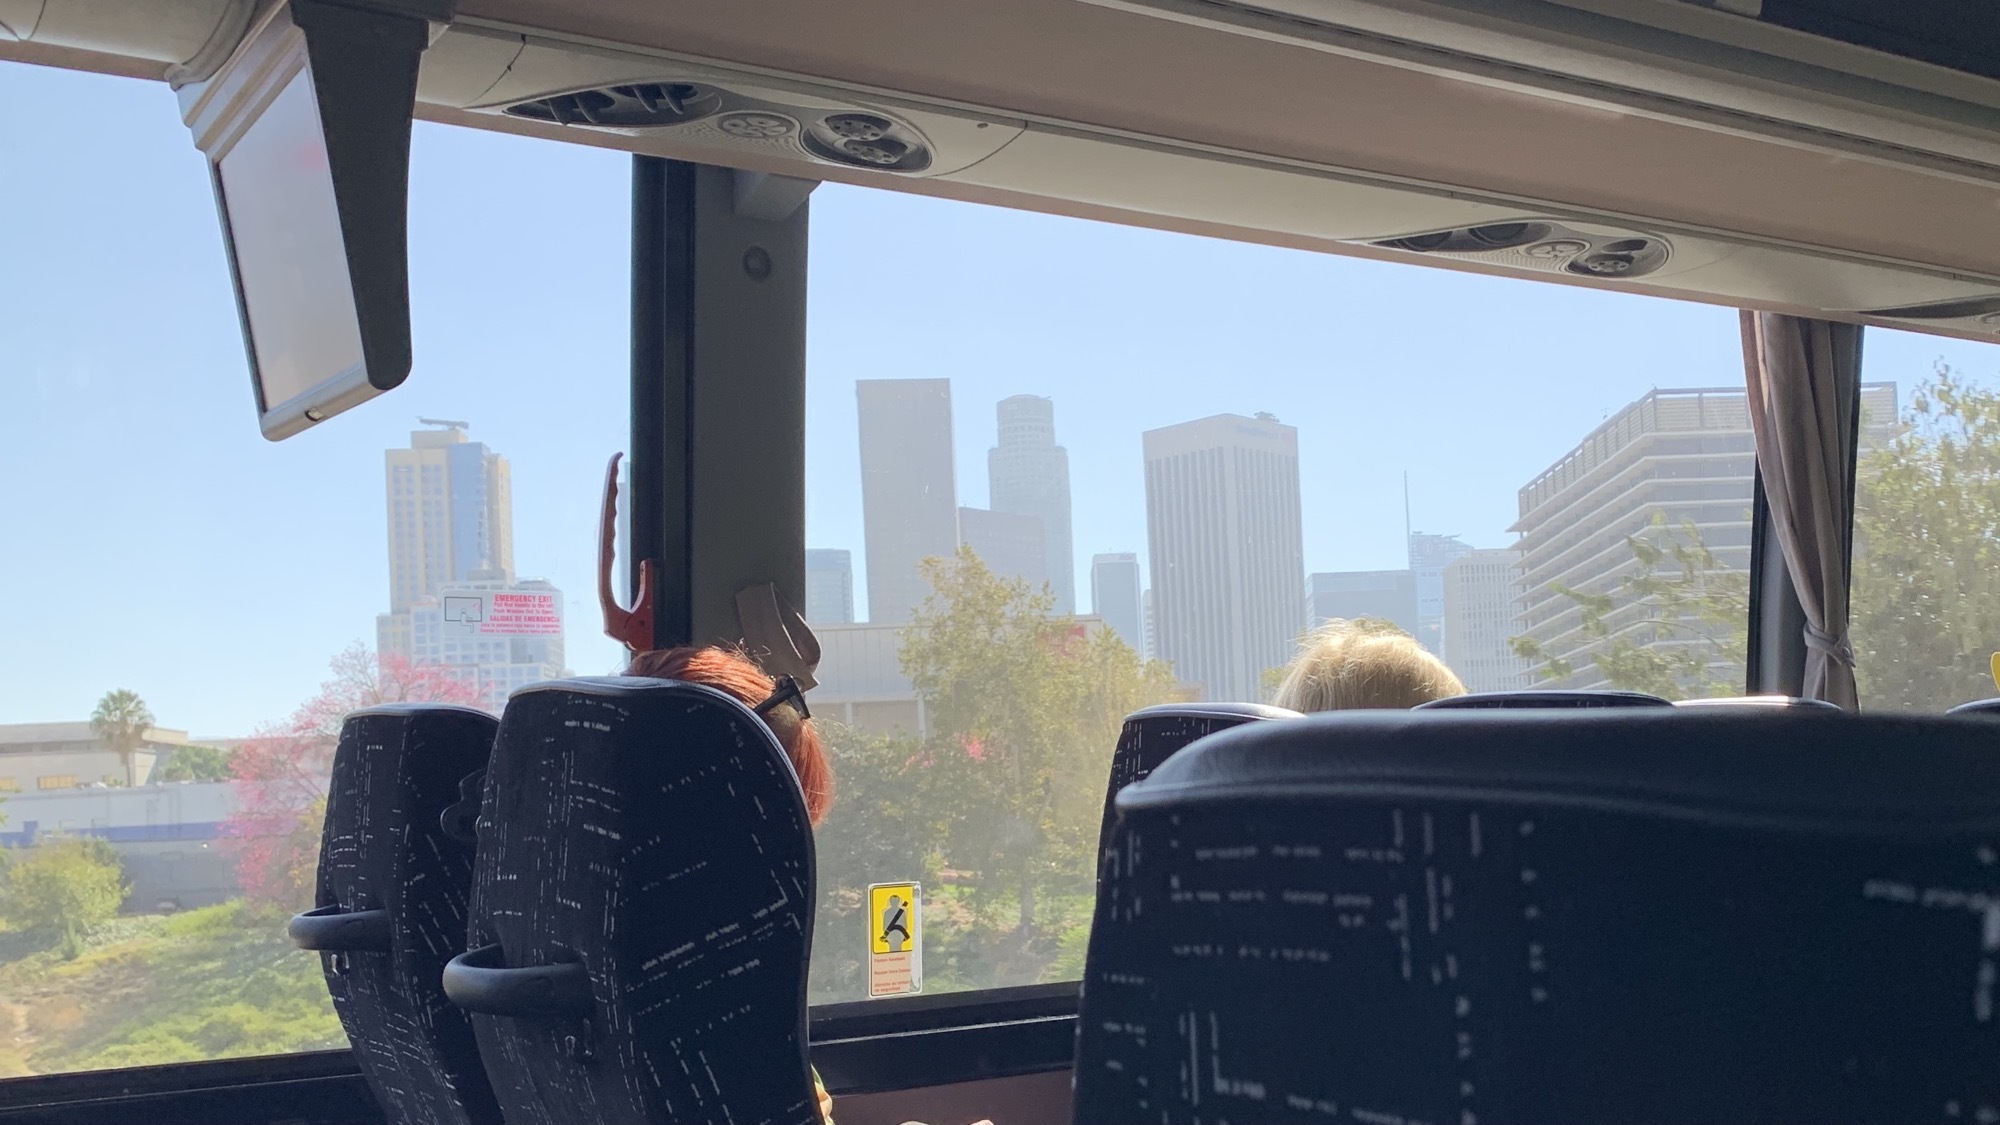 LA Looks Like A Badly Rendered Video Game In This Pic I Took From A Bus